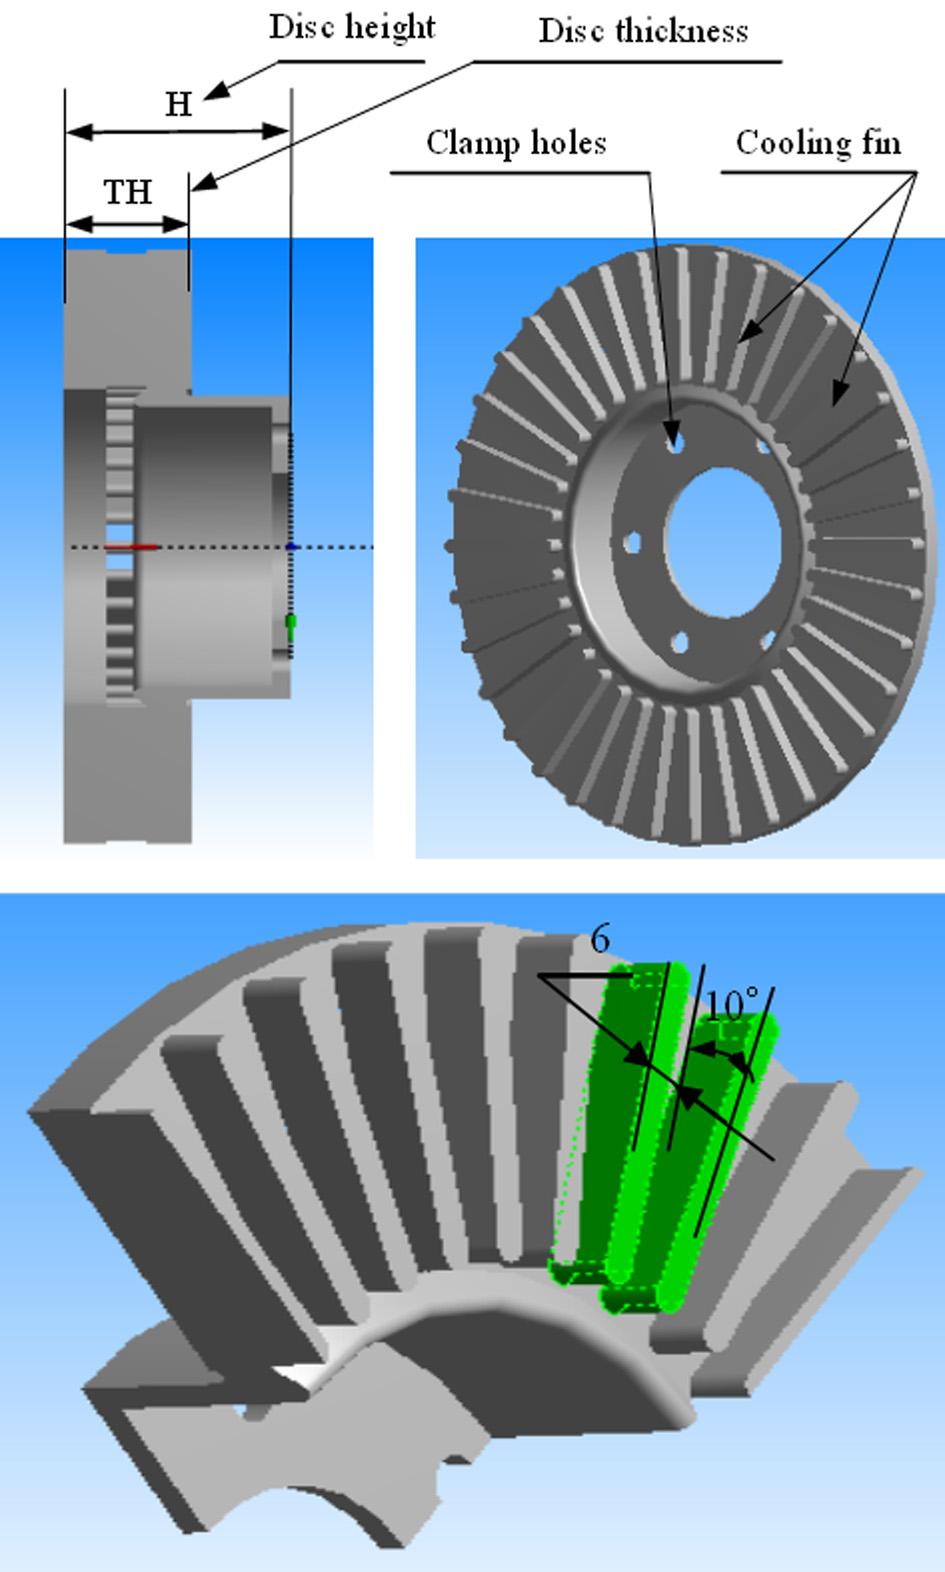 swept by a brake pad [m 2 ], v 0 is the initial speed of the vehicle [m/s], ε p is the factor load distributed on the disc surface, m is the mass of the vehicle [kg] and g =9.